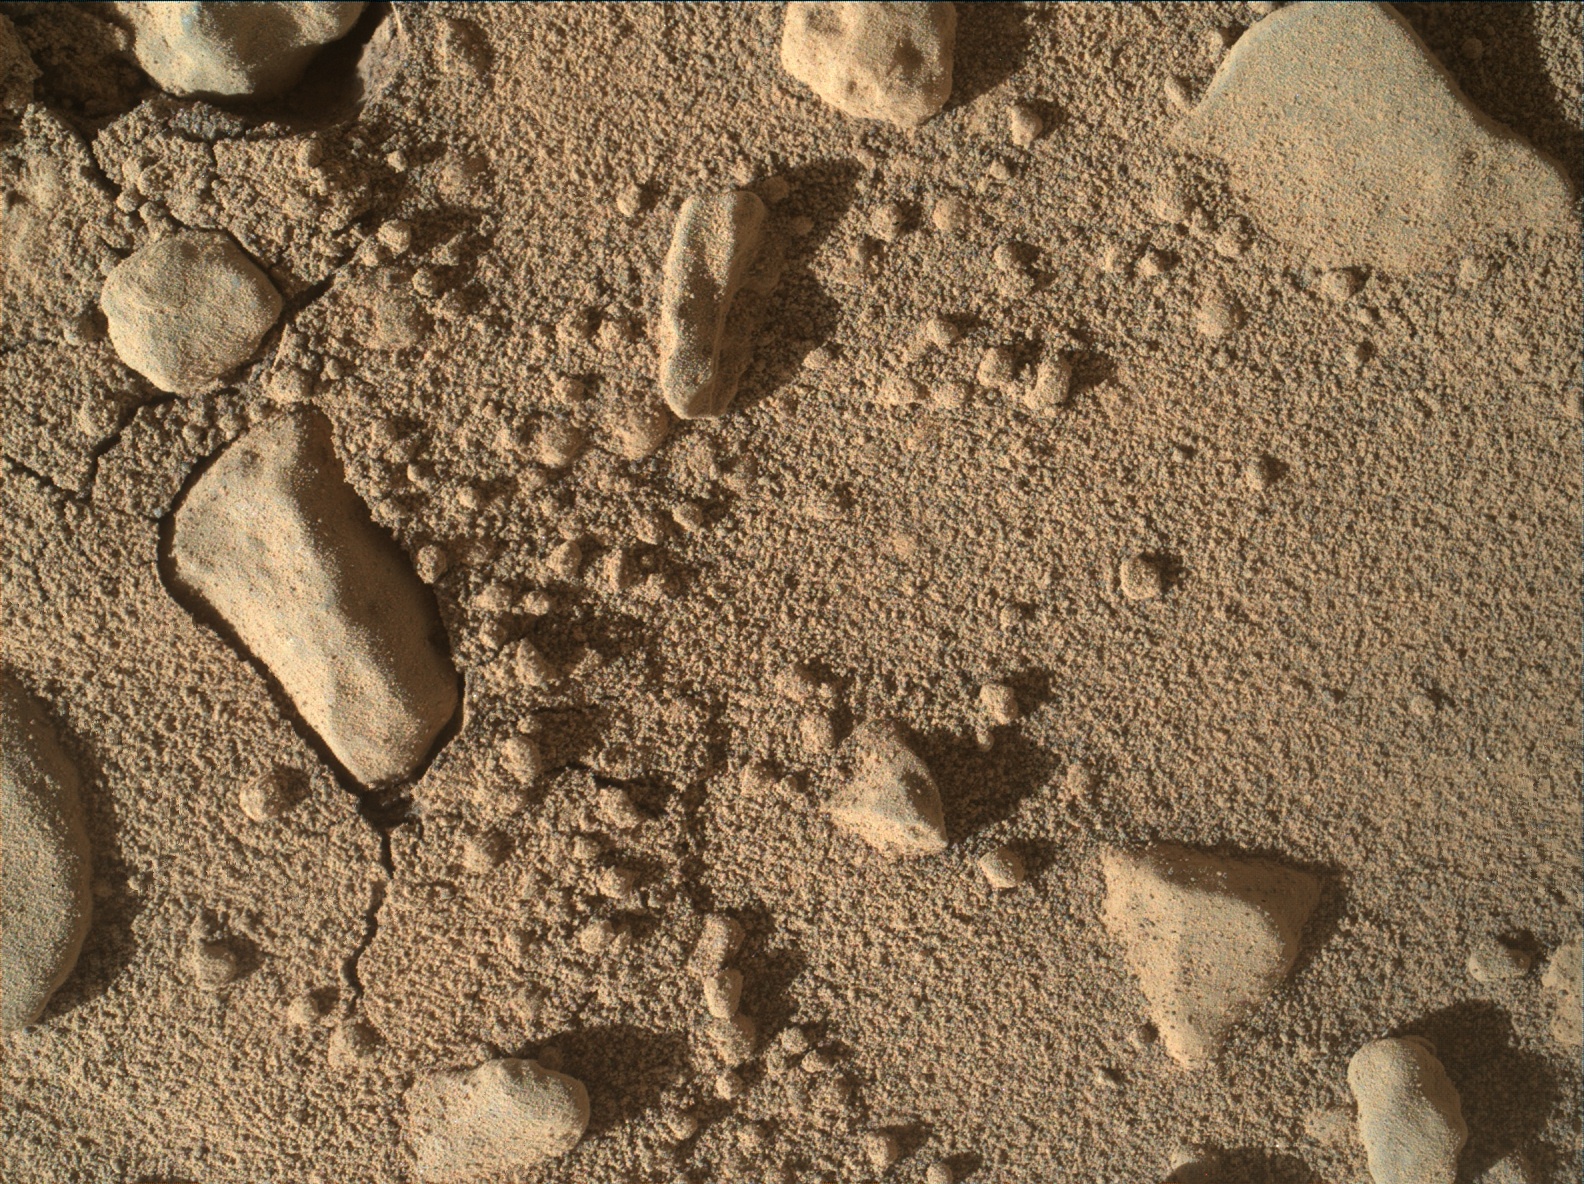 Nasa's Mars rover Curiosity acquired this image using its Mars Hand Lens Imager (MAHLI) on Sol 523